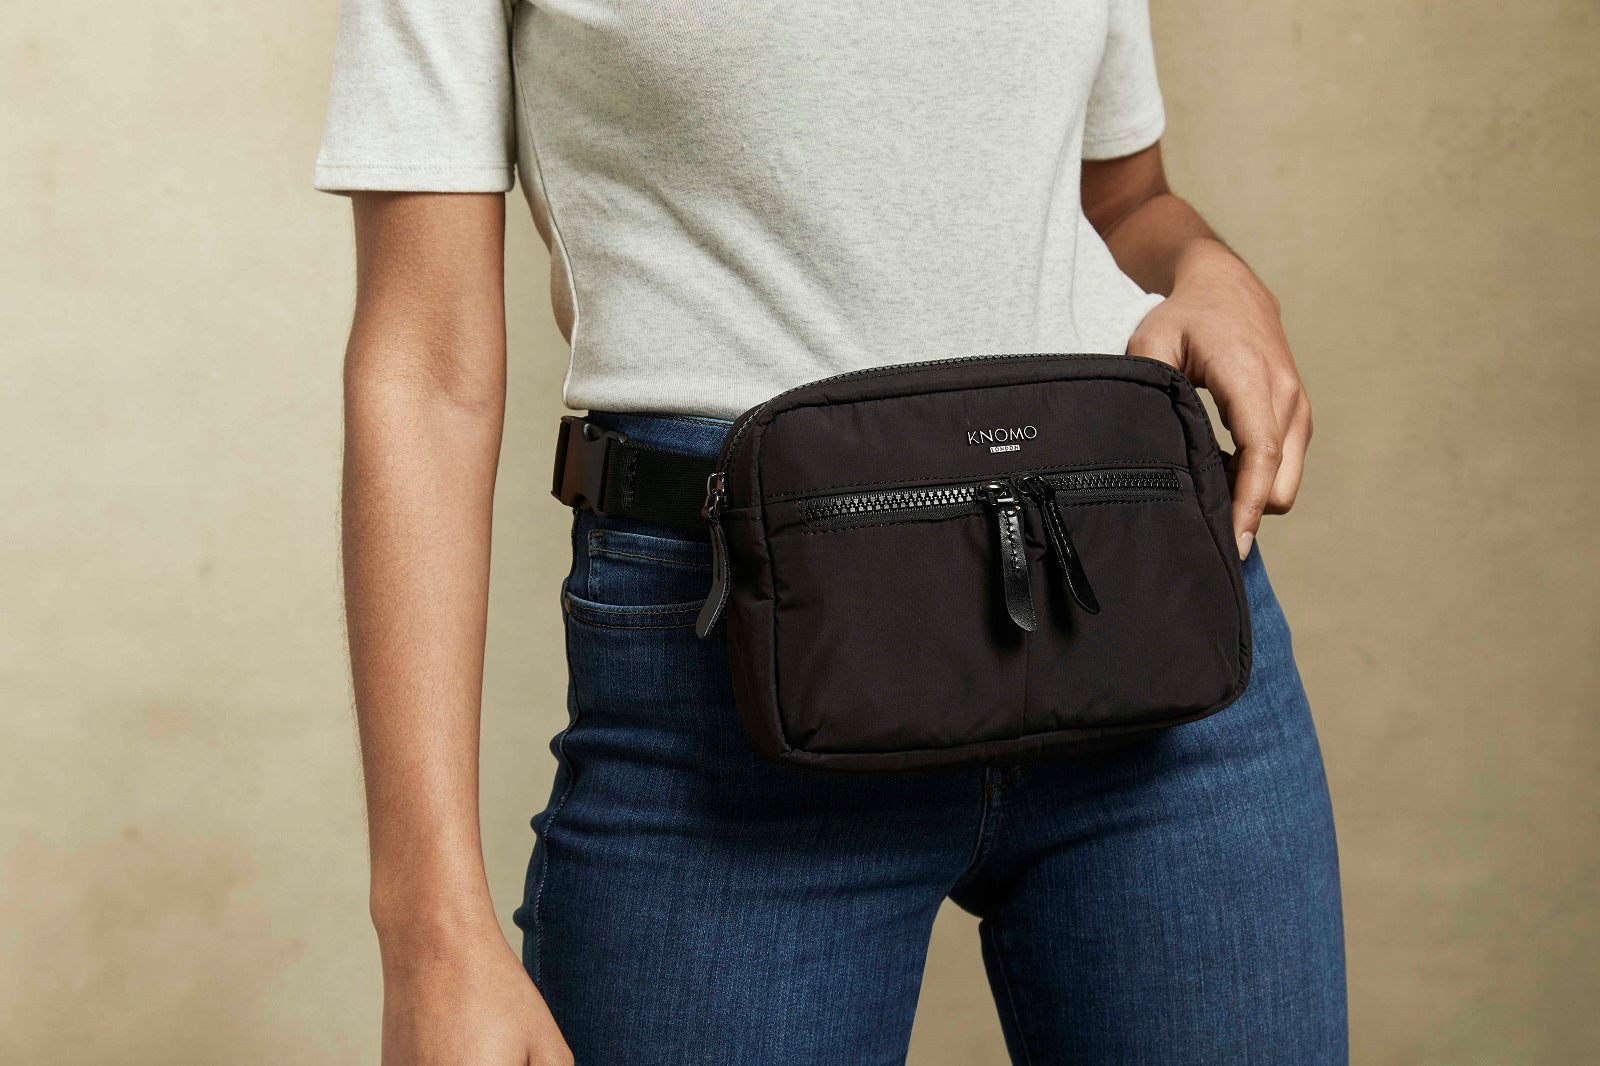 Fanny Pack, Bum Bag, Whatever You Choose To Call Them; They Are Back!